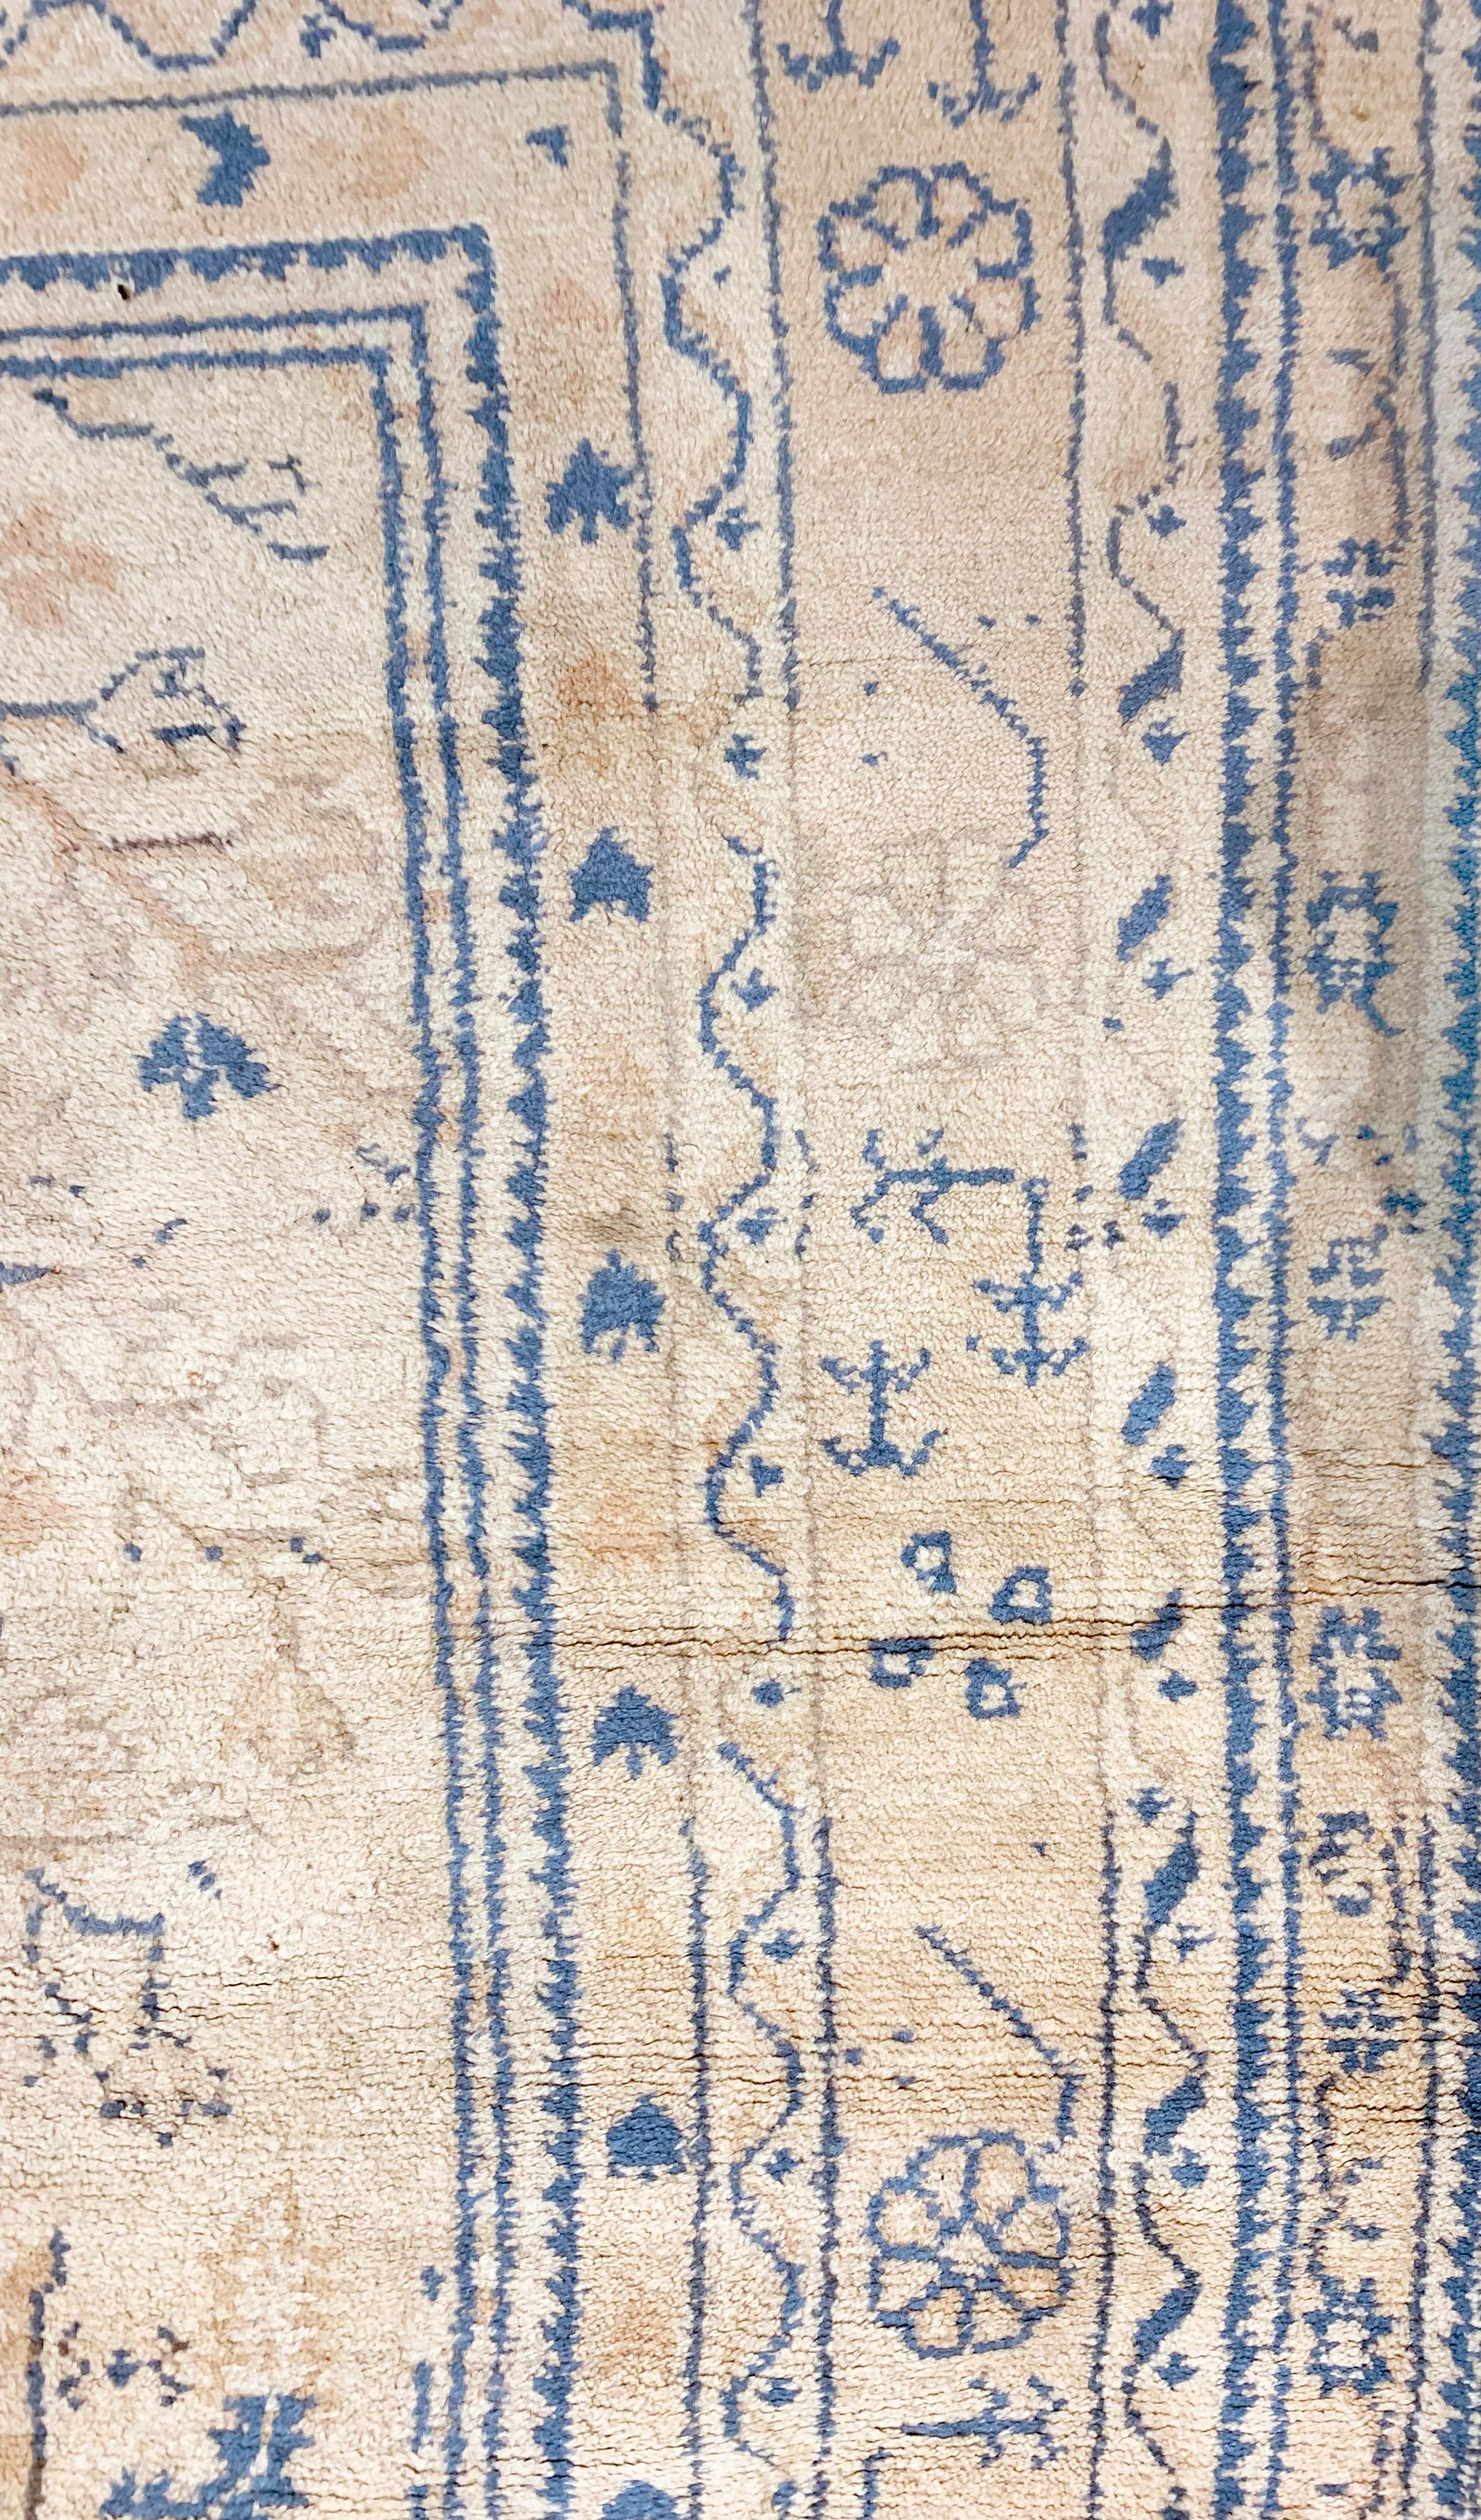 Vintage Turkish Oushak Carpet 9'8 x 14'10. Oushaks are known for their soft palettes combined with eccentric drawing. The relatively coarse weaves, here on a wool foundation, mean vinery and branches are bent and broken rather than flowing smoothly,